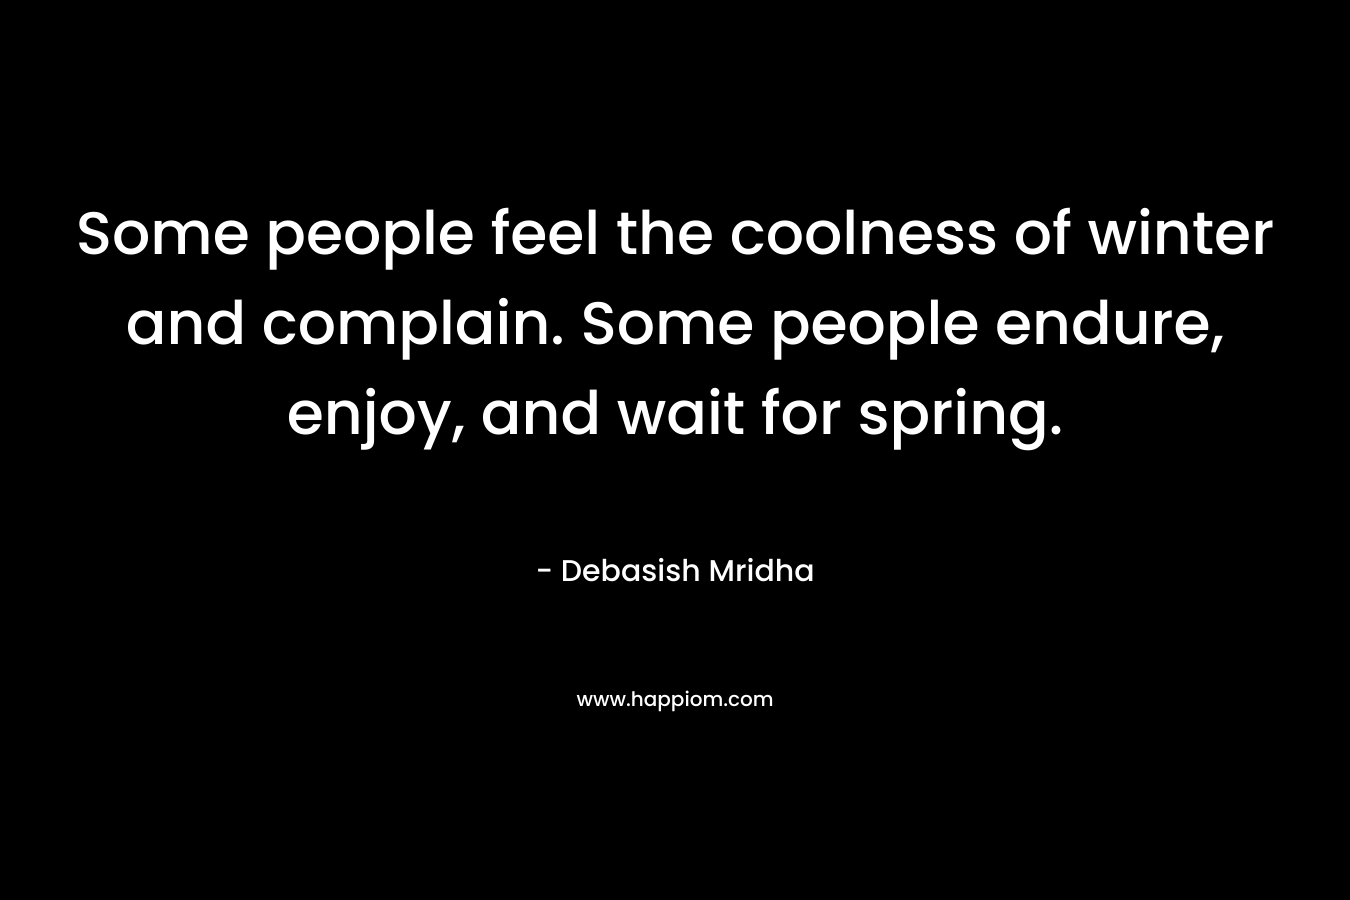 Some people feel the coolness of winter and complain. Some people endure, enjoy, and wait for spring.